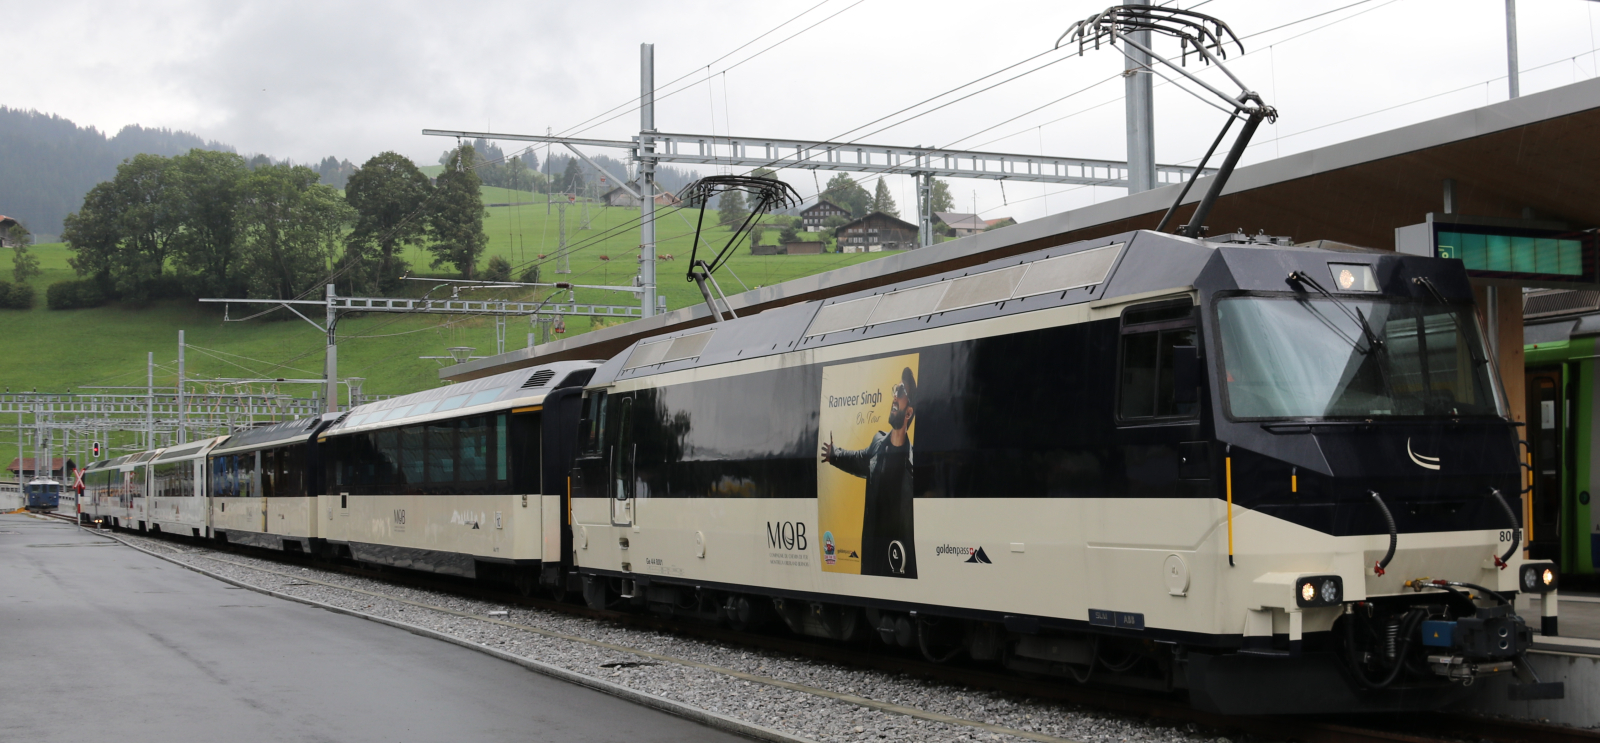 No. 8001 in September 2018 with the Panoramic Express in Zweisimmen